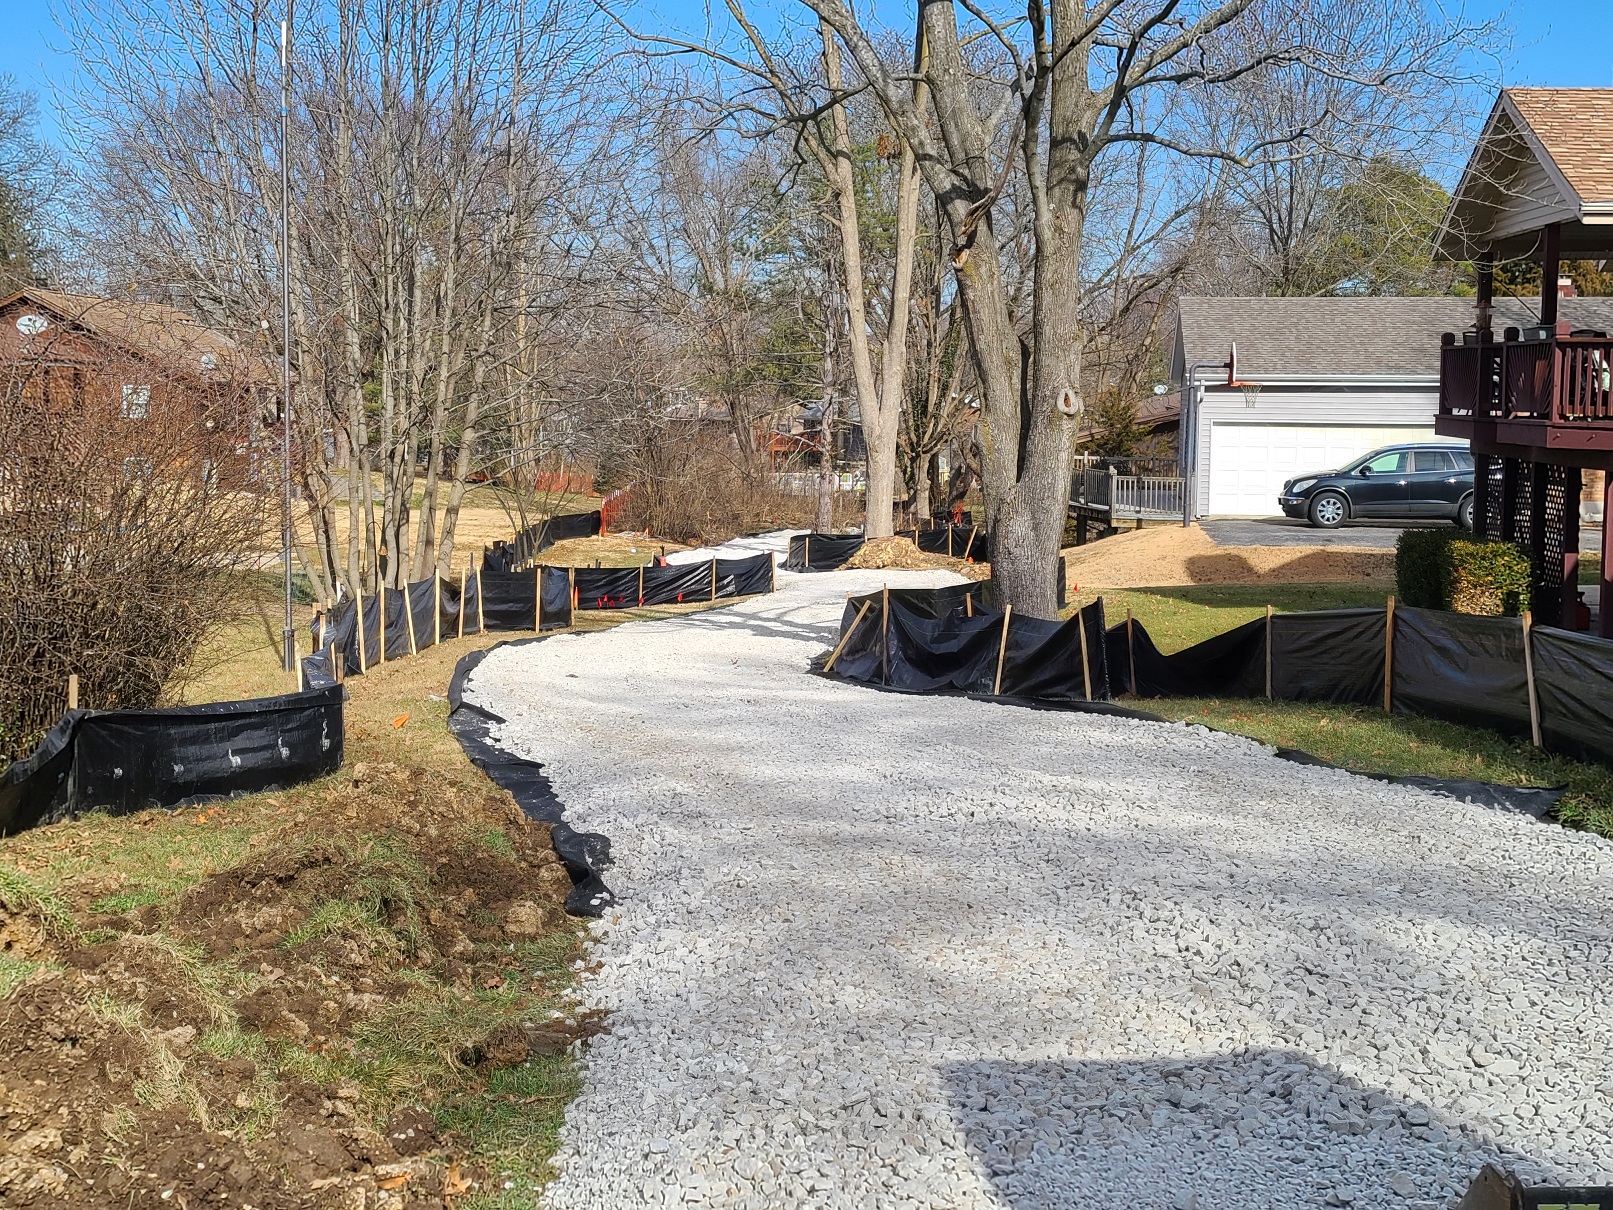 Picardy Dr. Drainage Improvement Project